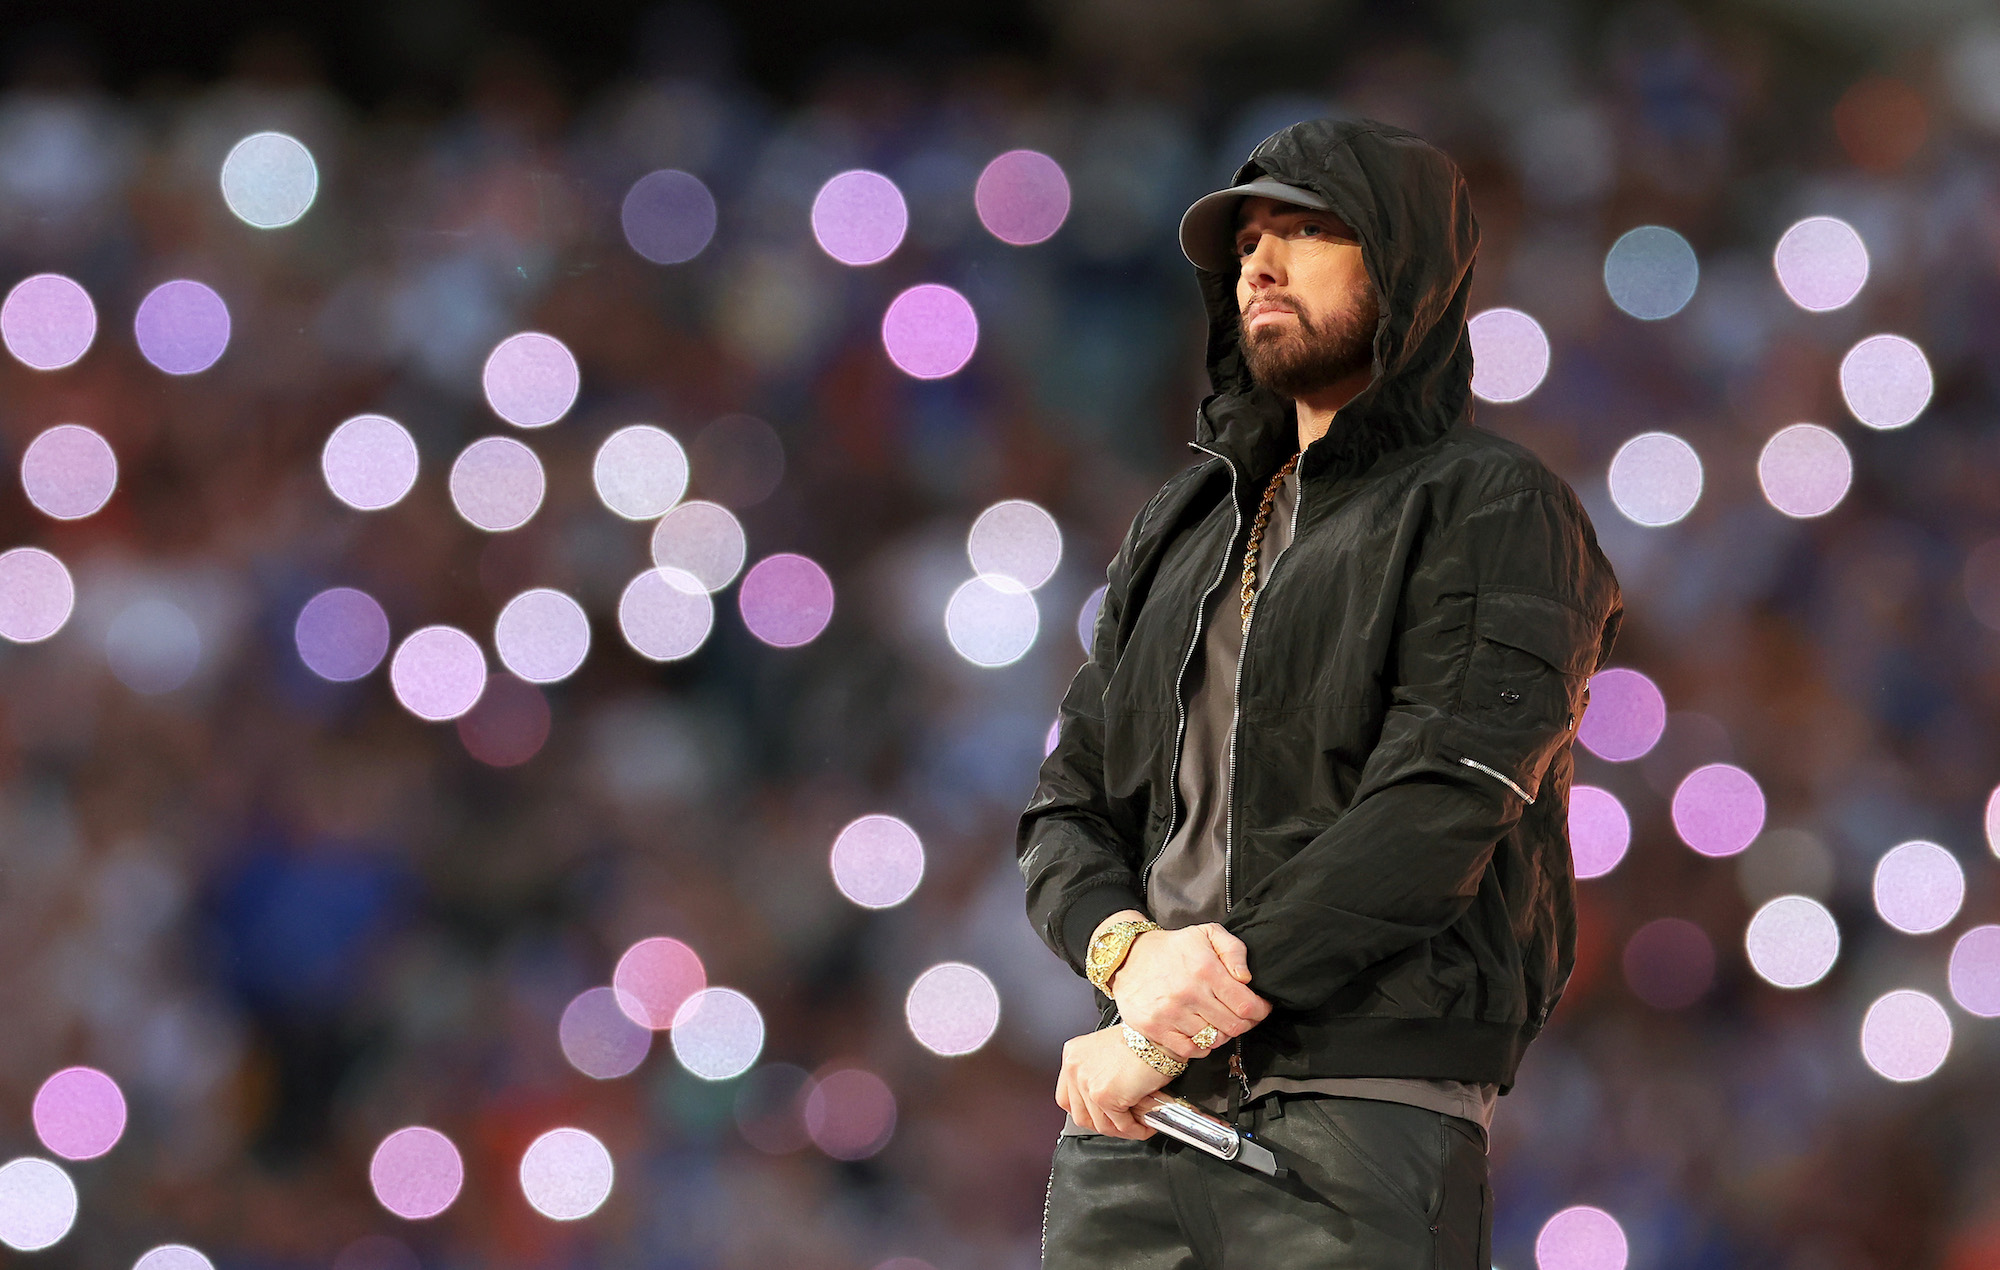 Eminem’s Curtain Call 2 set for August Release